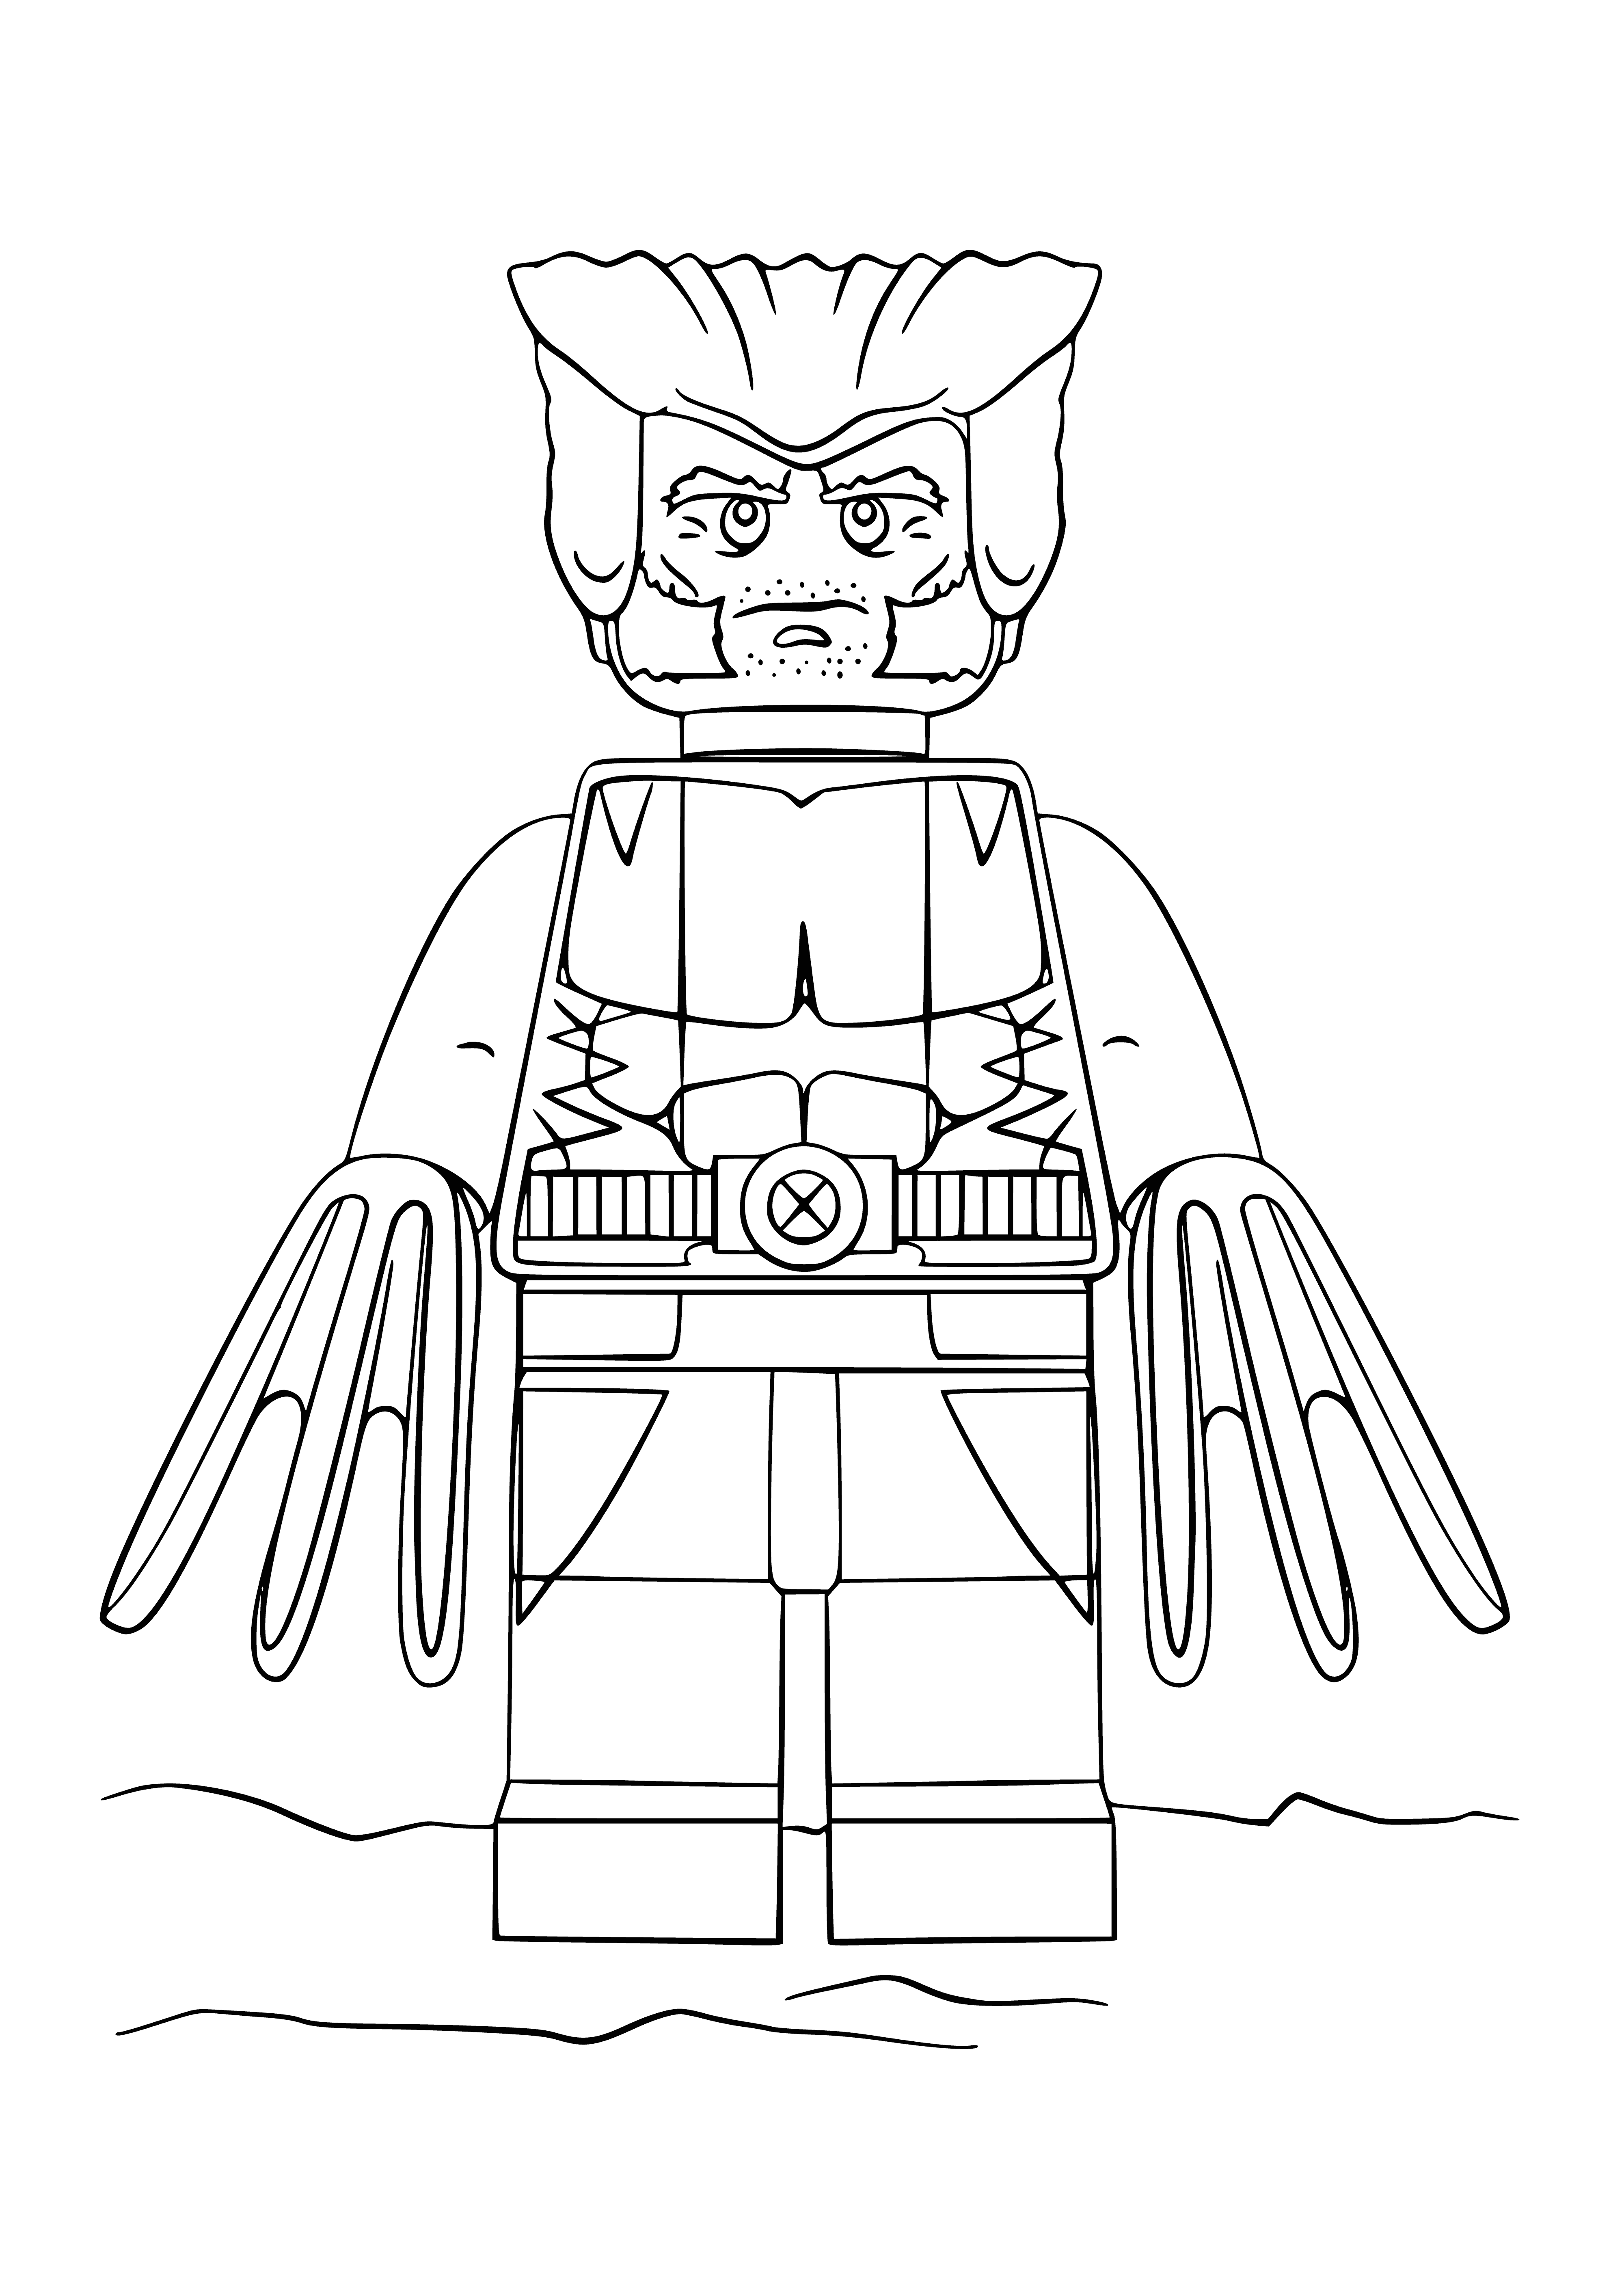 coloring page: Wolverine rides a motorcycle, two swords in hand, in a yellow/brown suit with armour & a facial mask - except for two furry ears.